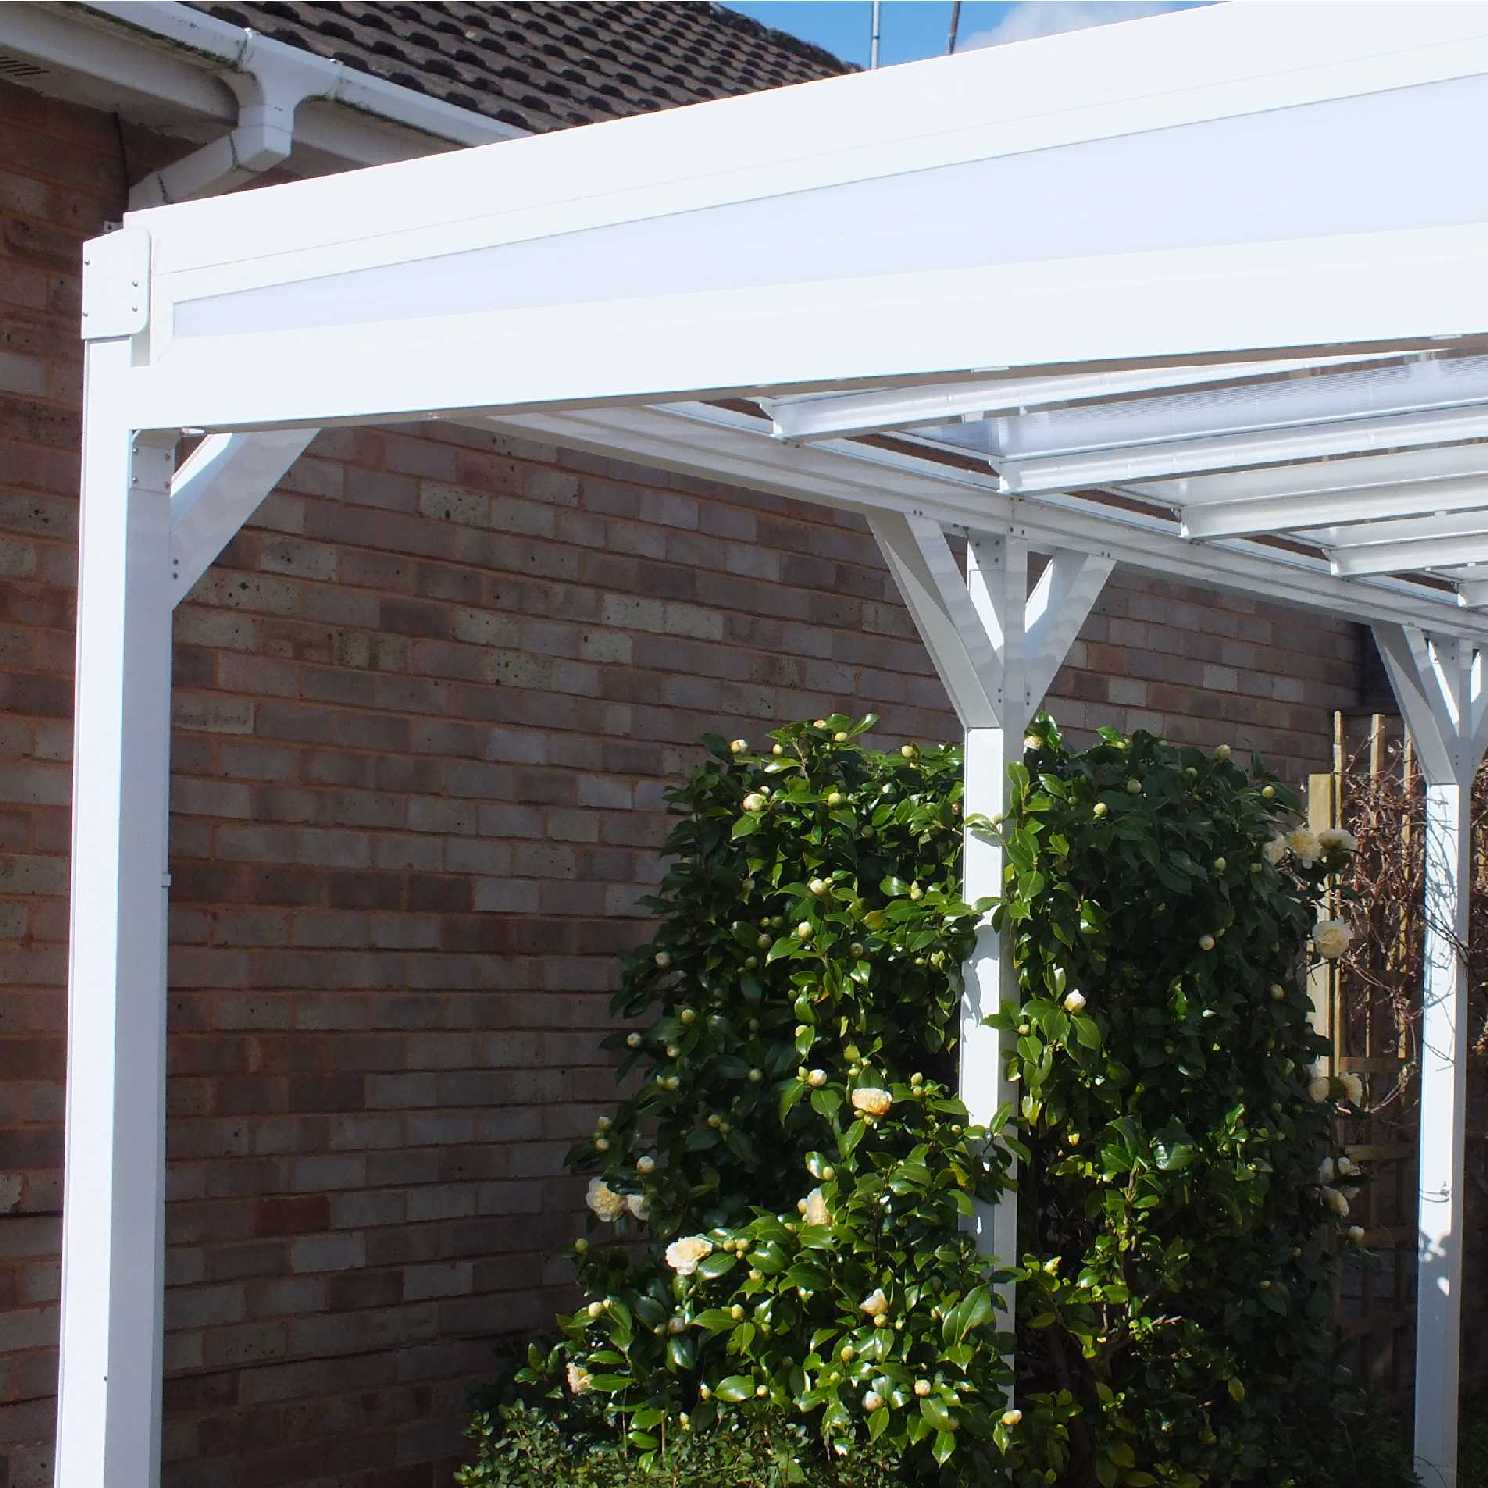 Omega Smart Lean-To Canopy, White with 16mm Polycarbonate Glazing - 7.4m (W) x 1.5m (P), (4) Supporting Posts from Omega Build